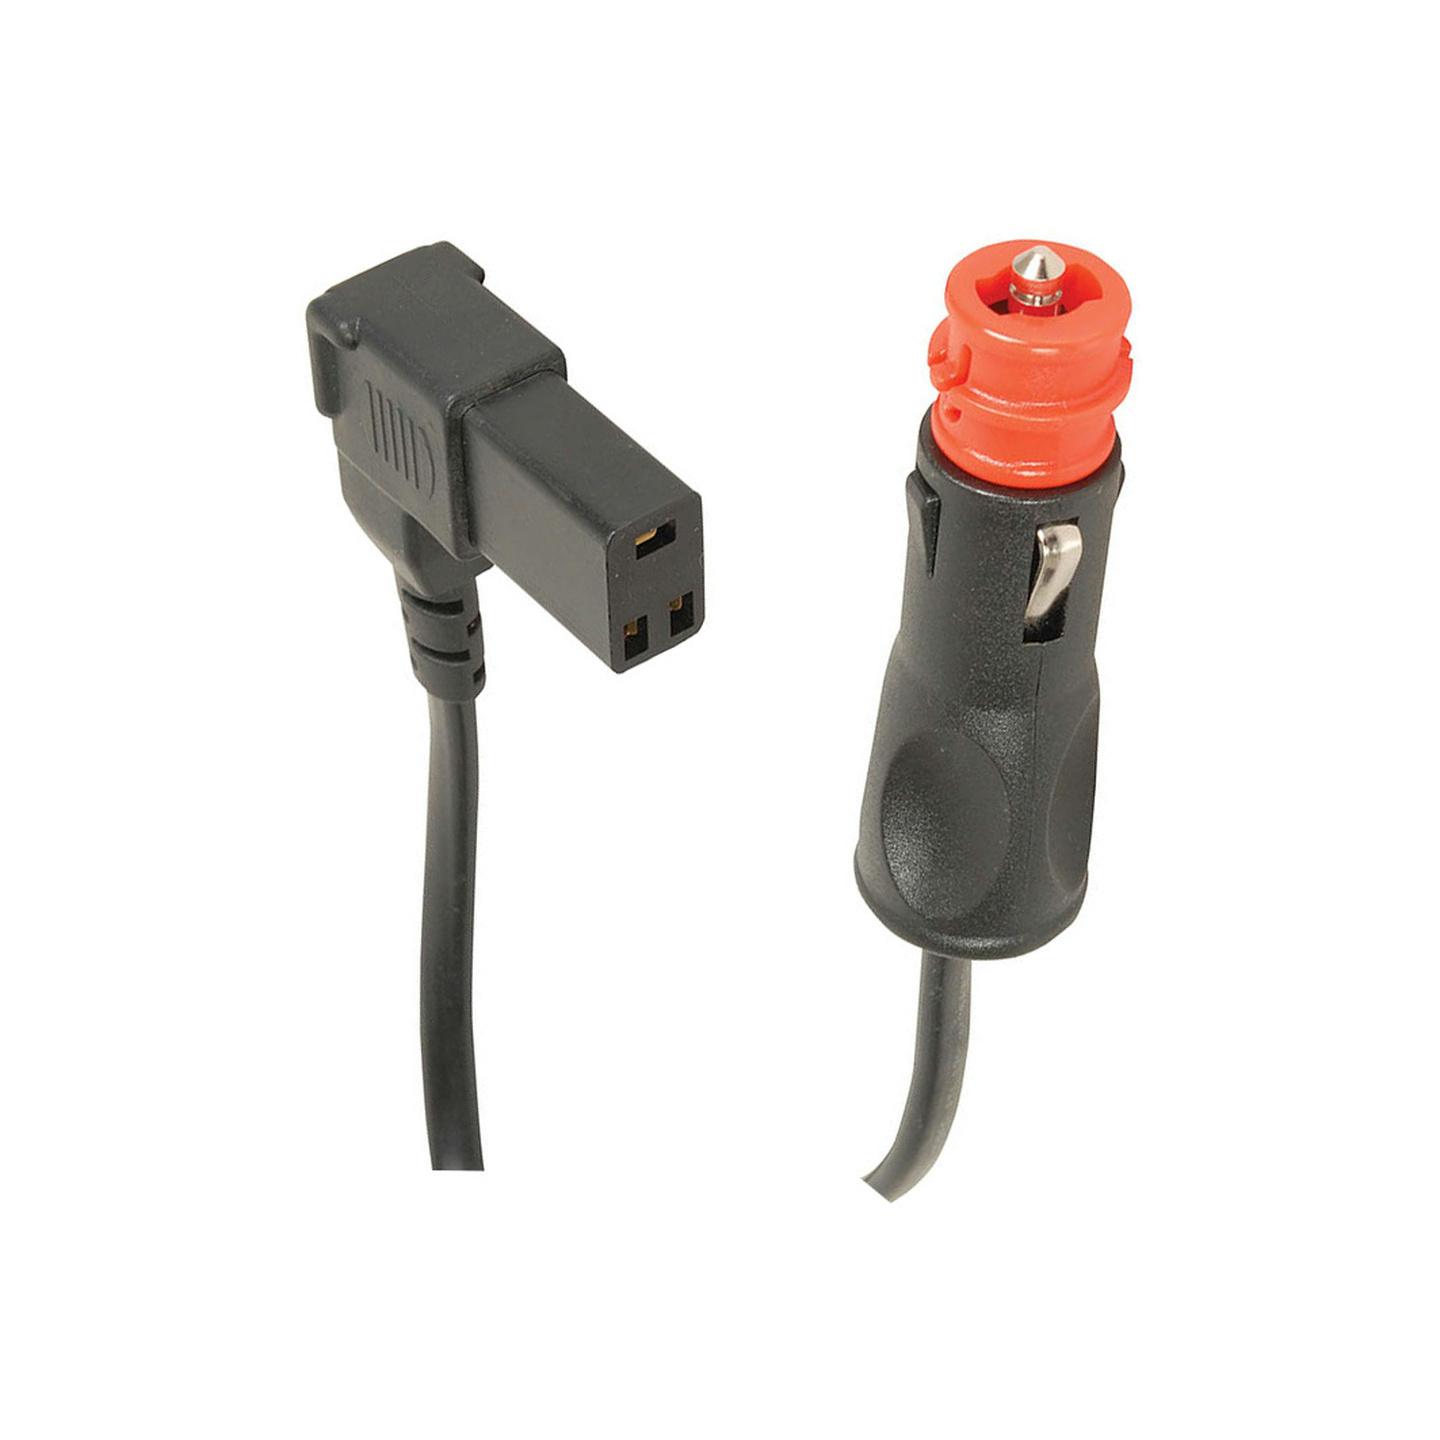 Replacement Power Cable to suit Engel Fridges